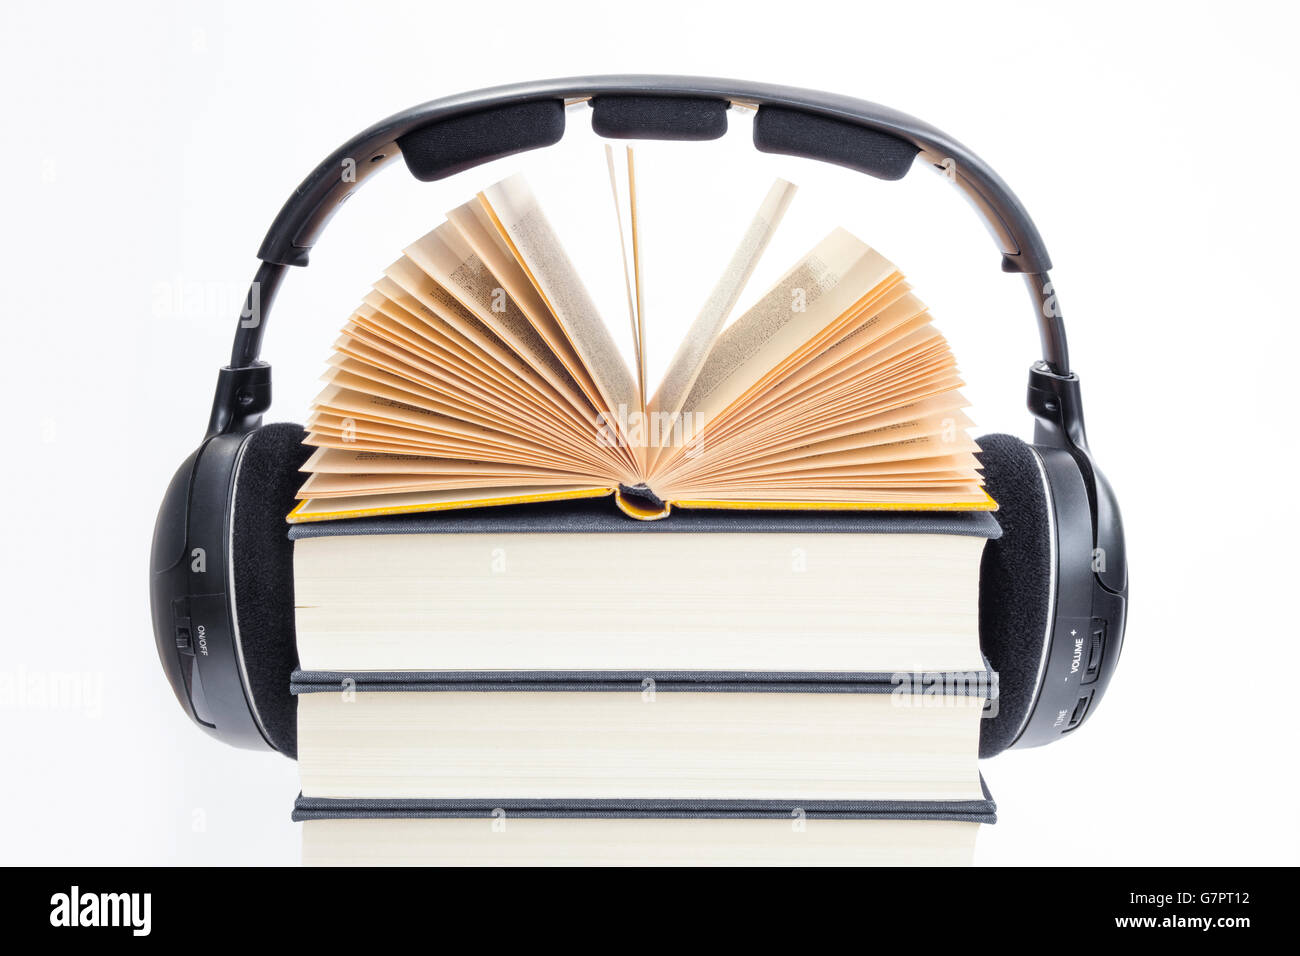 Group of books and headphones related to audiobooks, E-books and digitally listening  and storytelling of written books Stock Photo